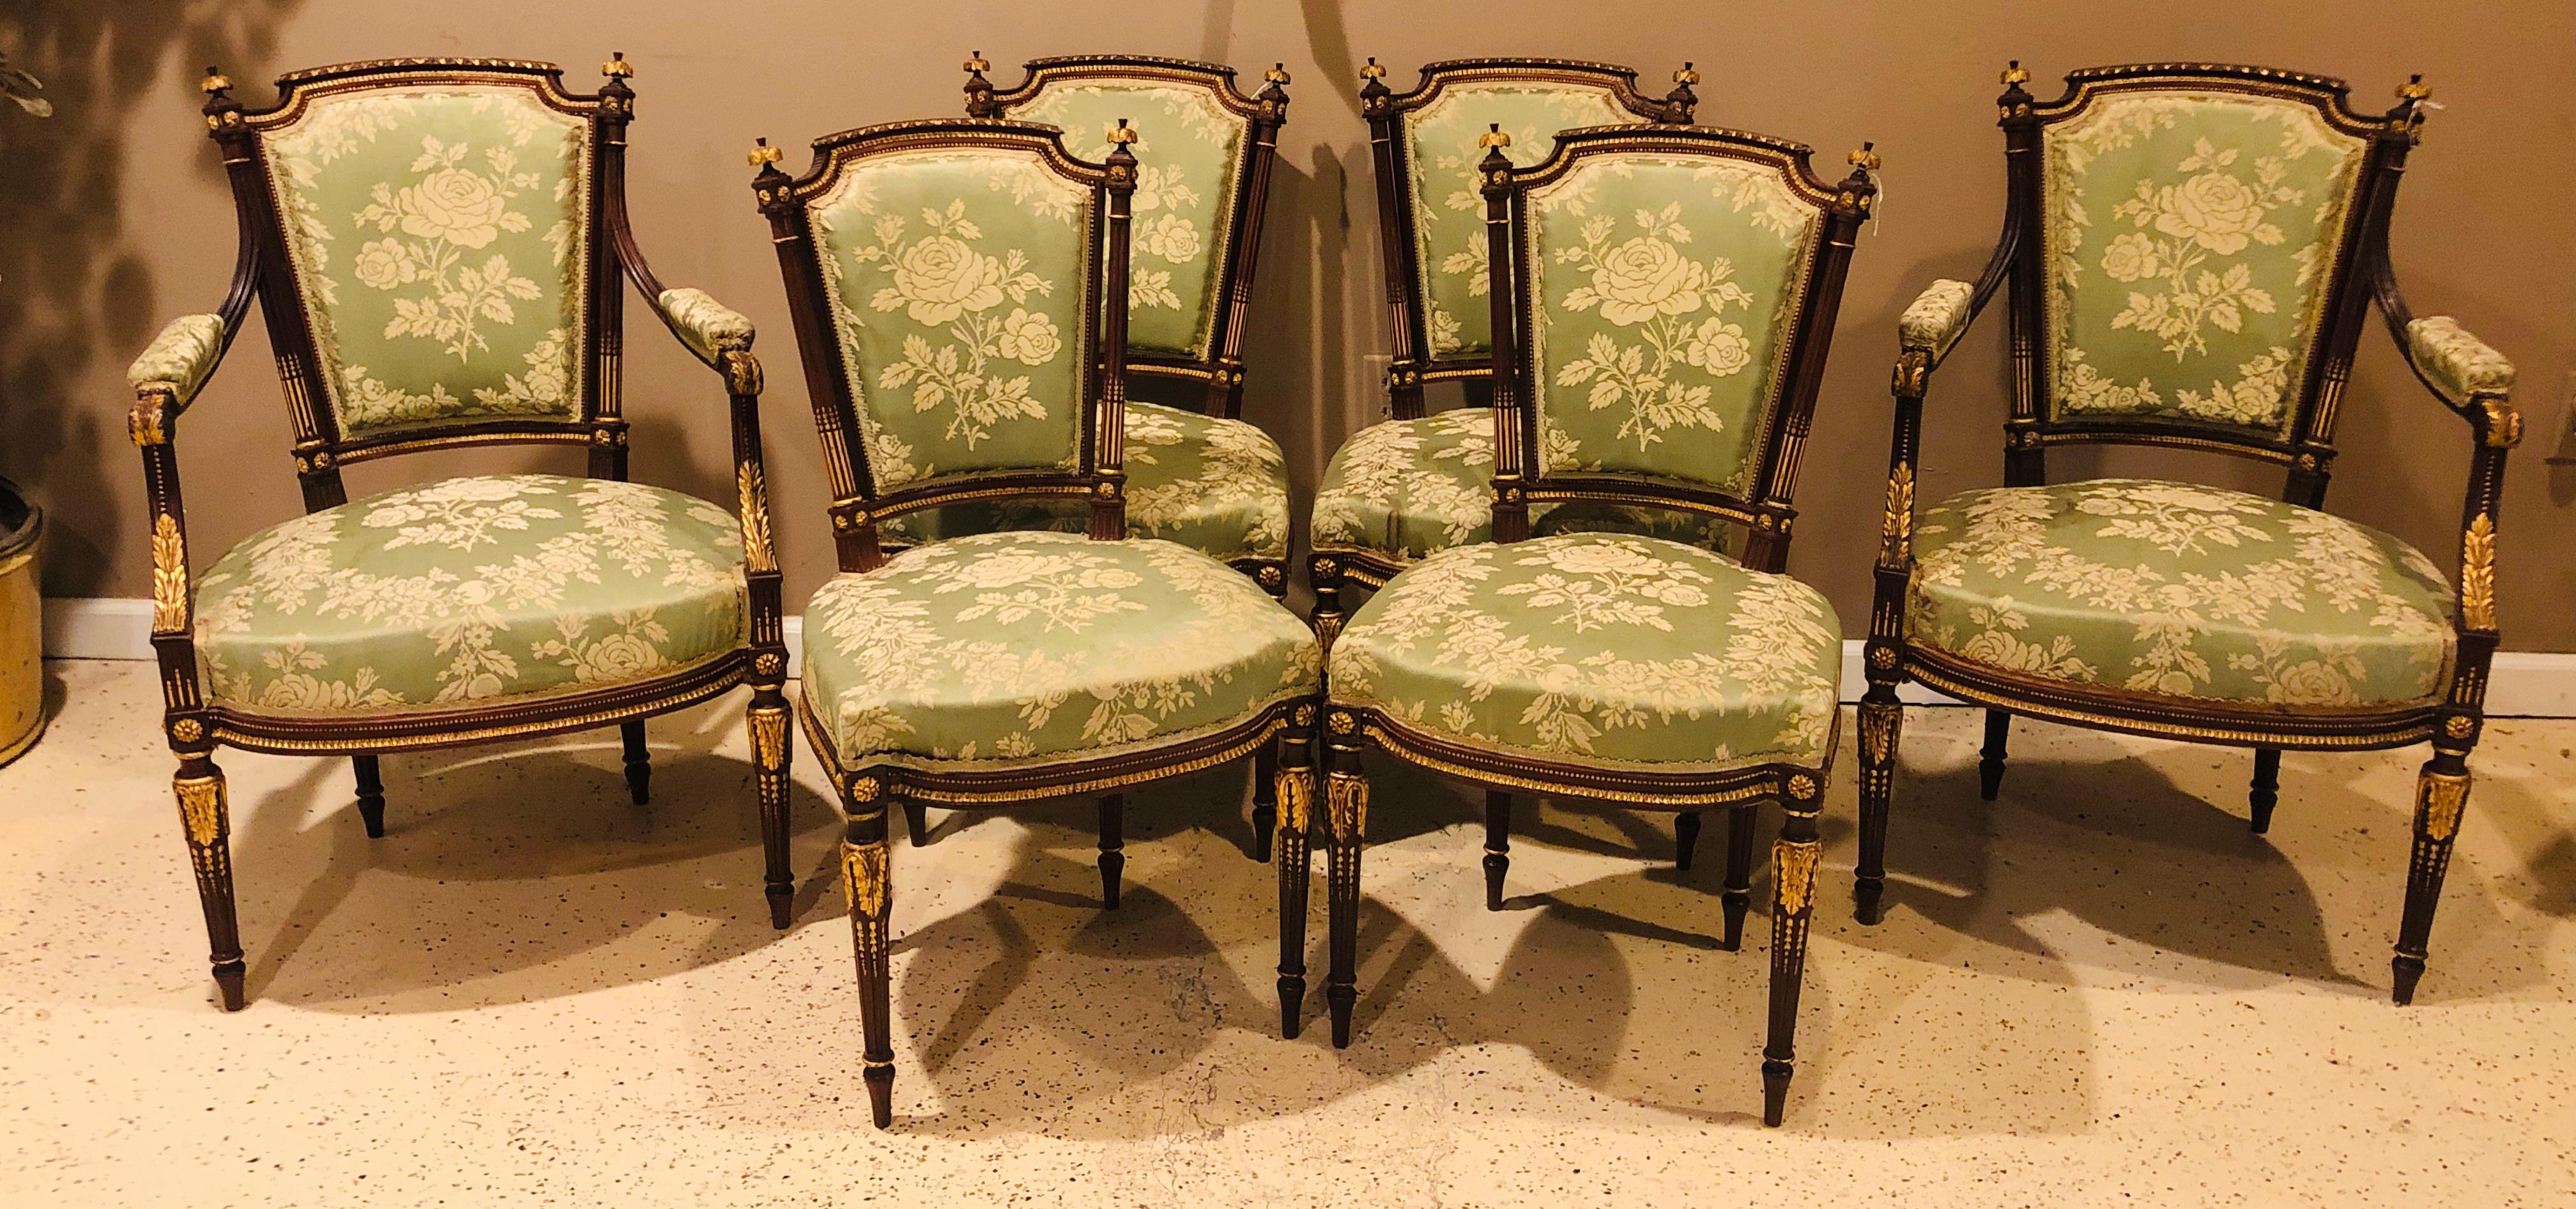 Louis XVI style parcel-gilt mahogany six-piece parlor suite comprising a pair of arm and four side chairs in celery damask silk upholstery. The pieces are all decorated with finely carved wood work. Can purchase all or part of the set as is